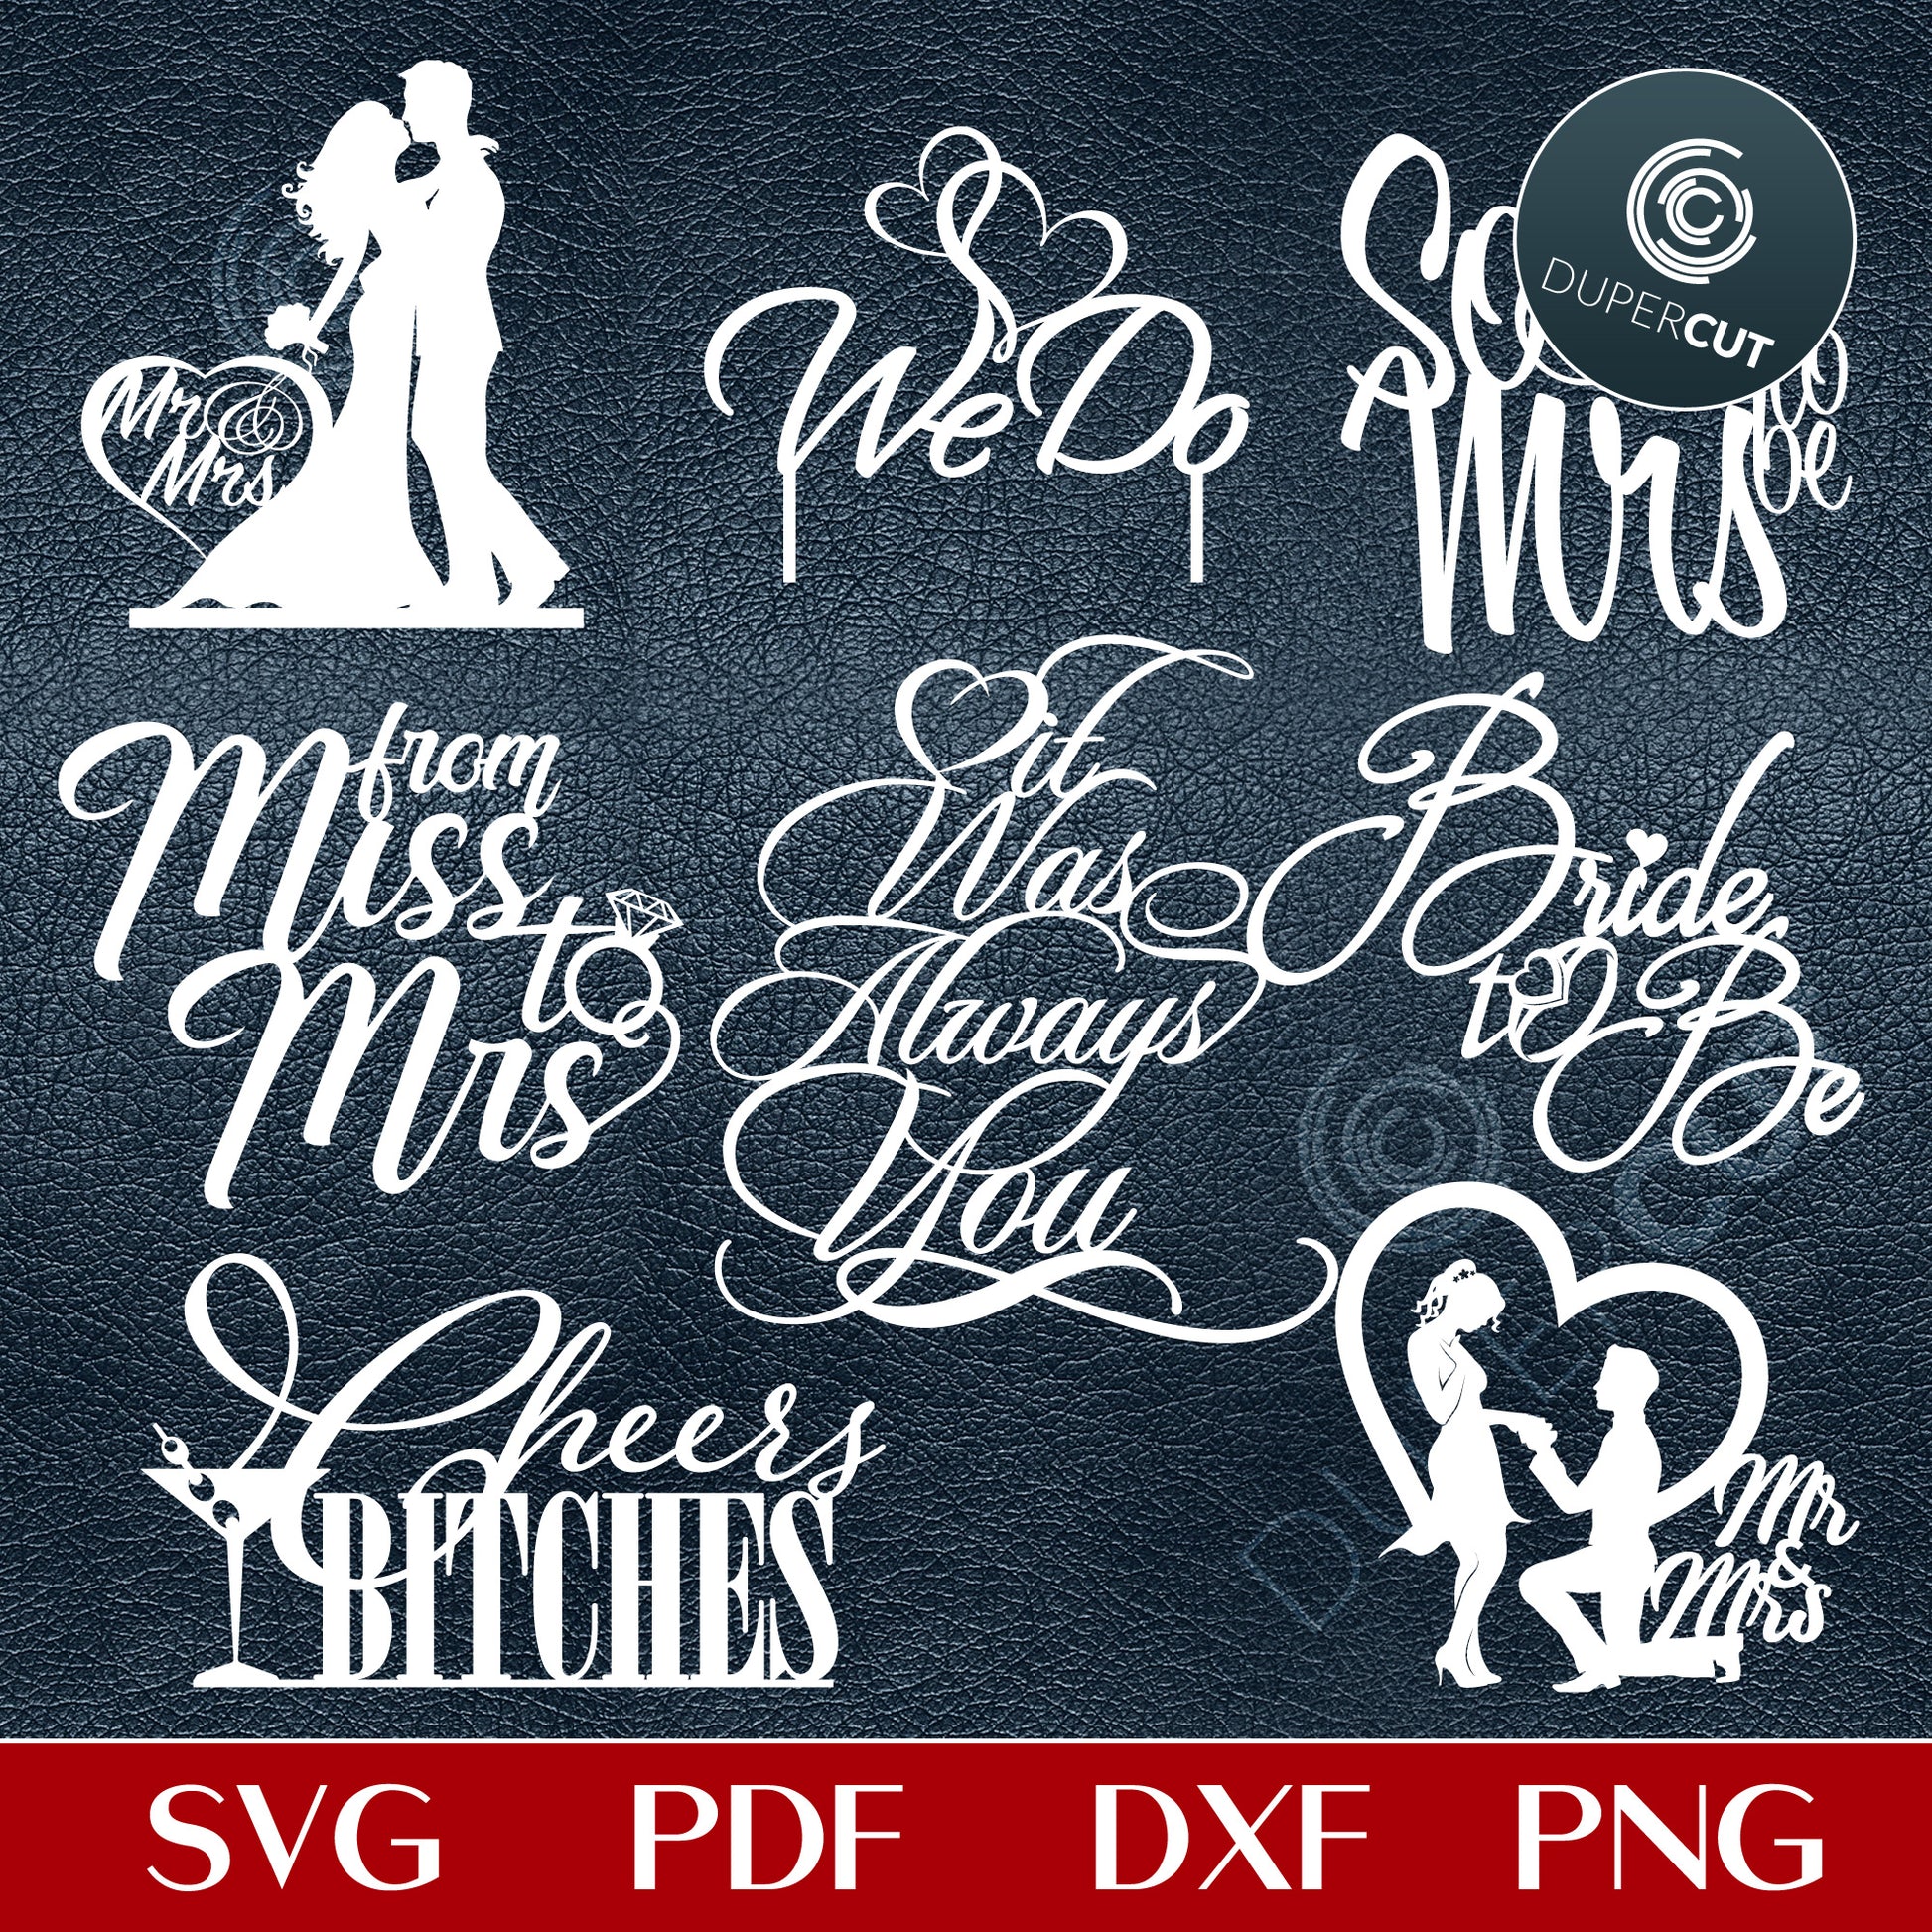 Wedding cake toppers collection - SVG PDF DXF cutting files for laser and digital machines, Glowforge, Cricut, Silhouette cameo, CNC plasma